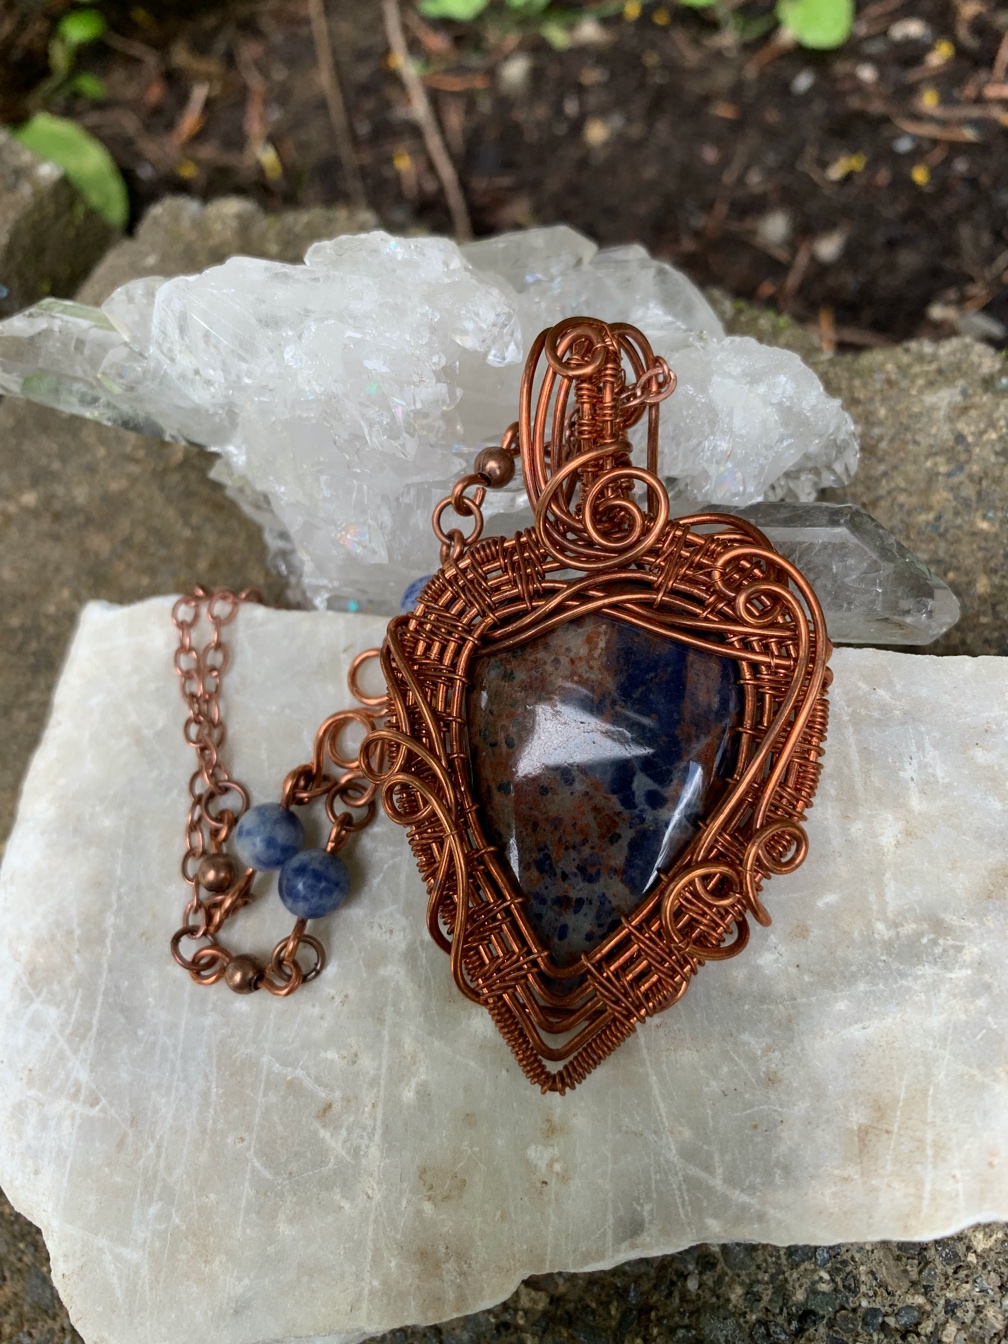 Blue stone ornately wrapped with copper wire.